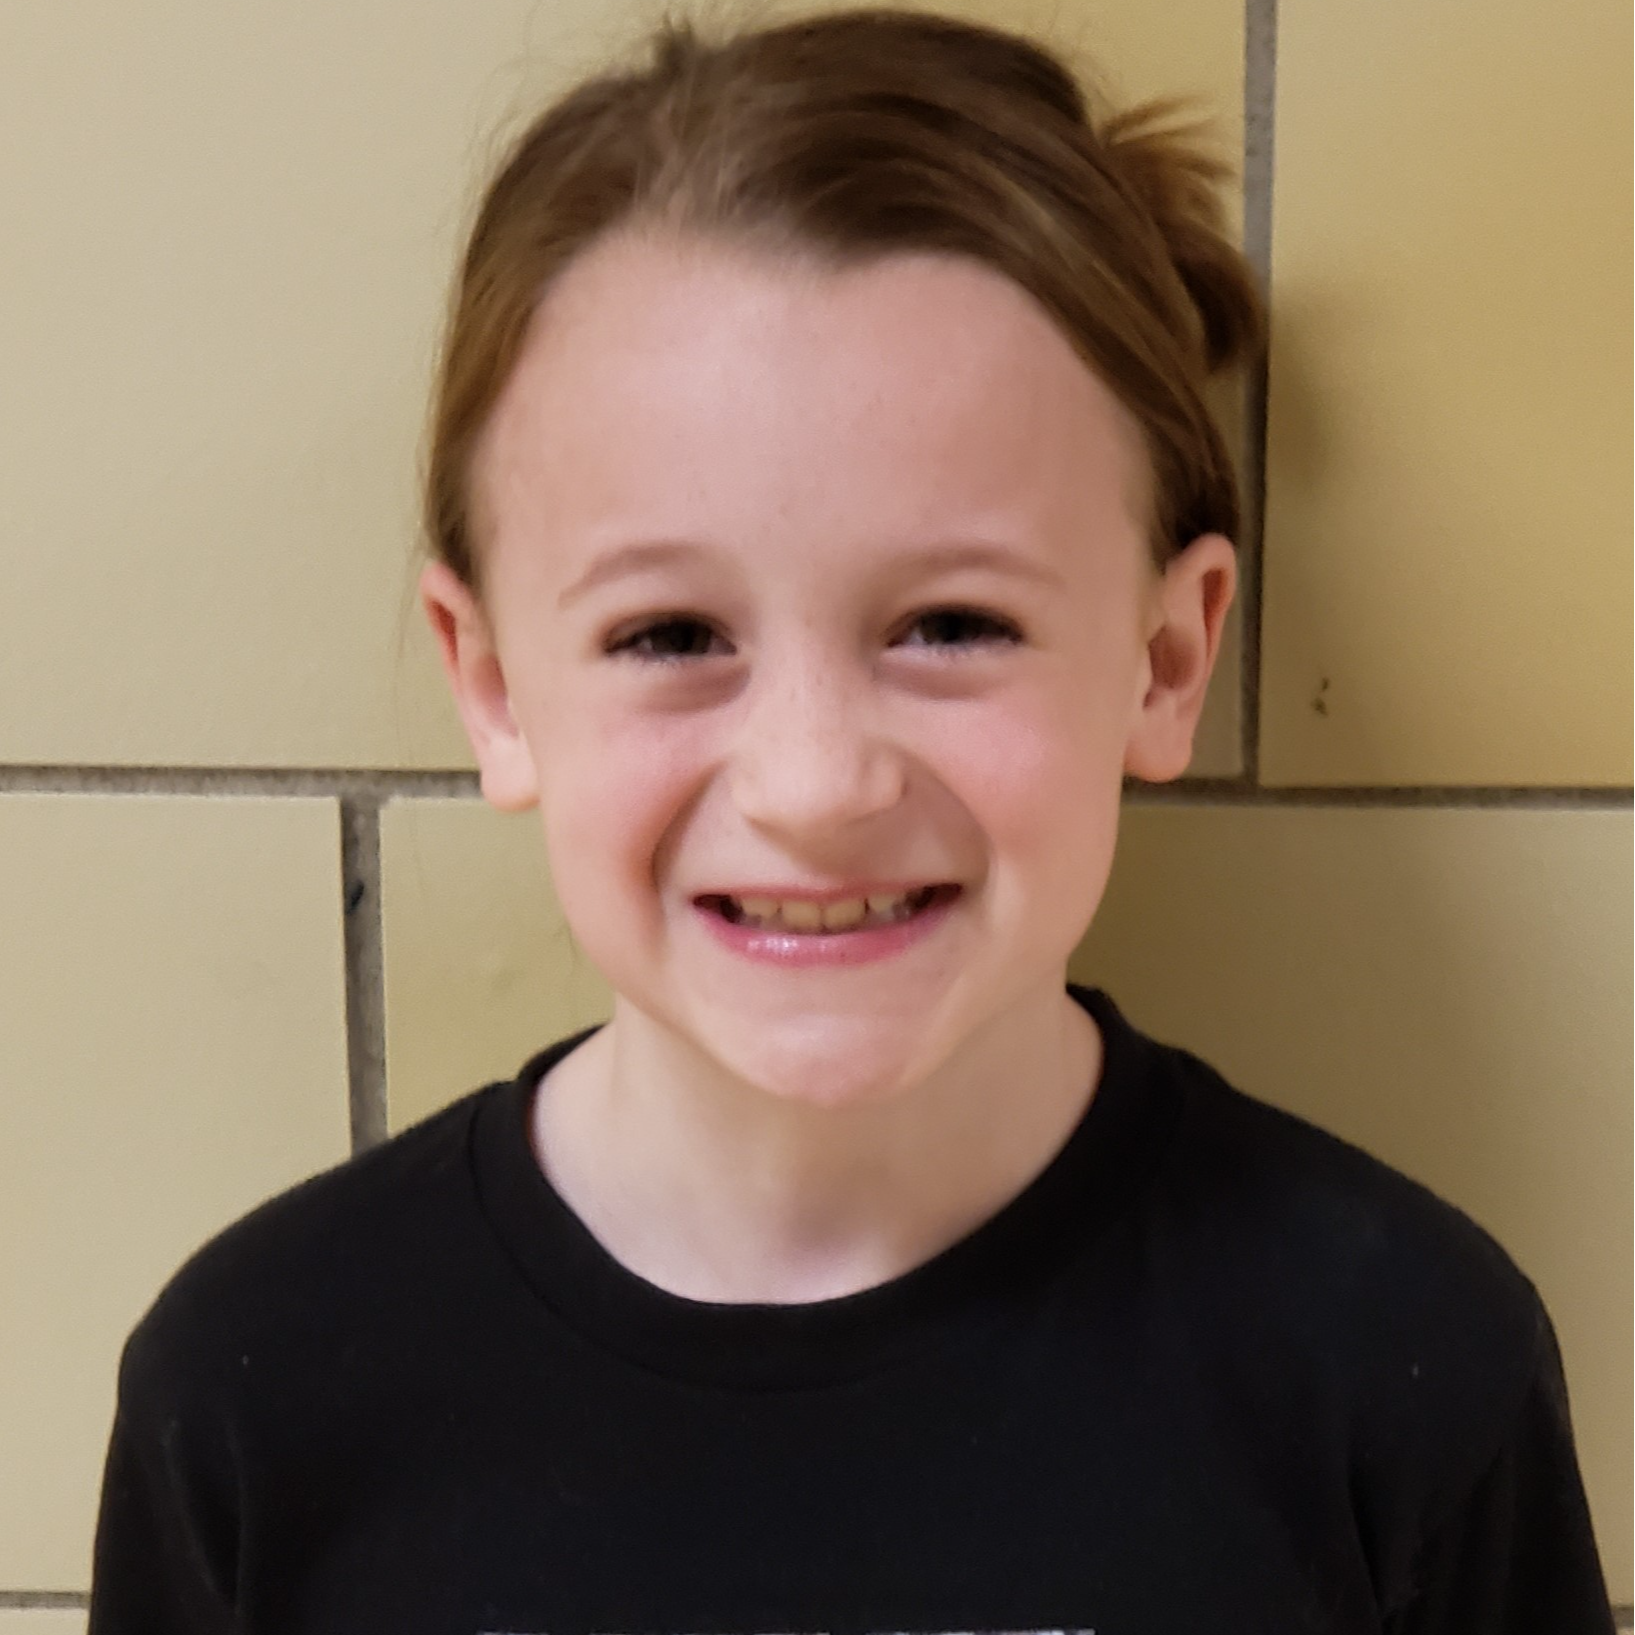 smiling girl with light brown hair pulled back wearing a black t-shirt